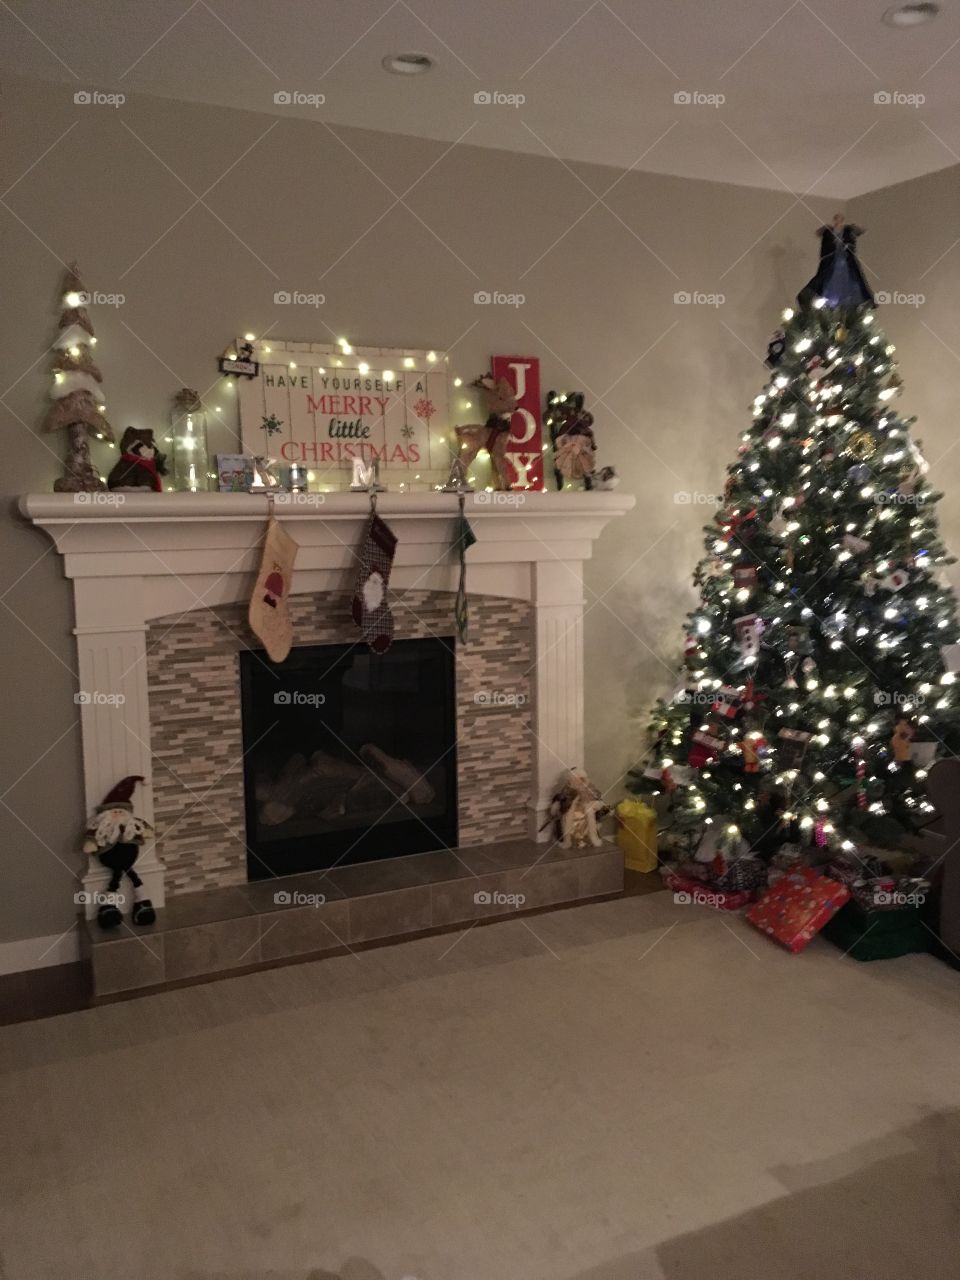 Christmas tree, stockings and fireplace decorated with lights